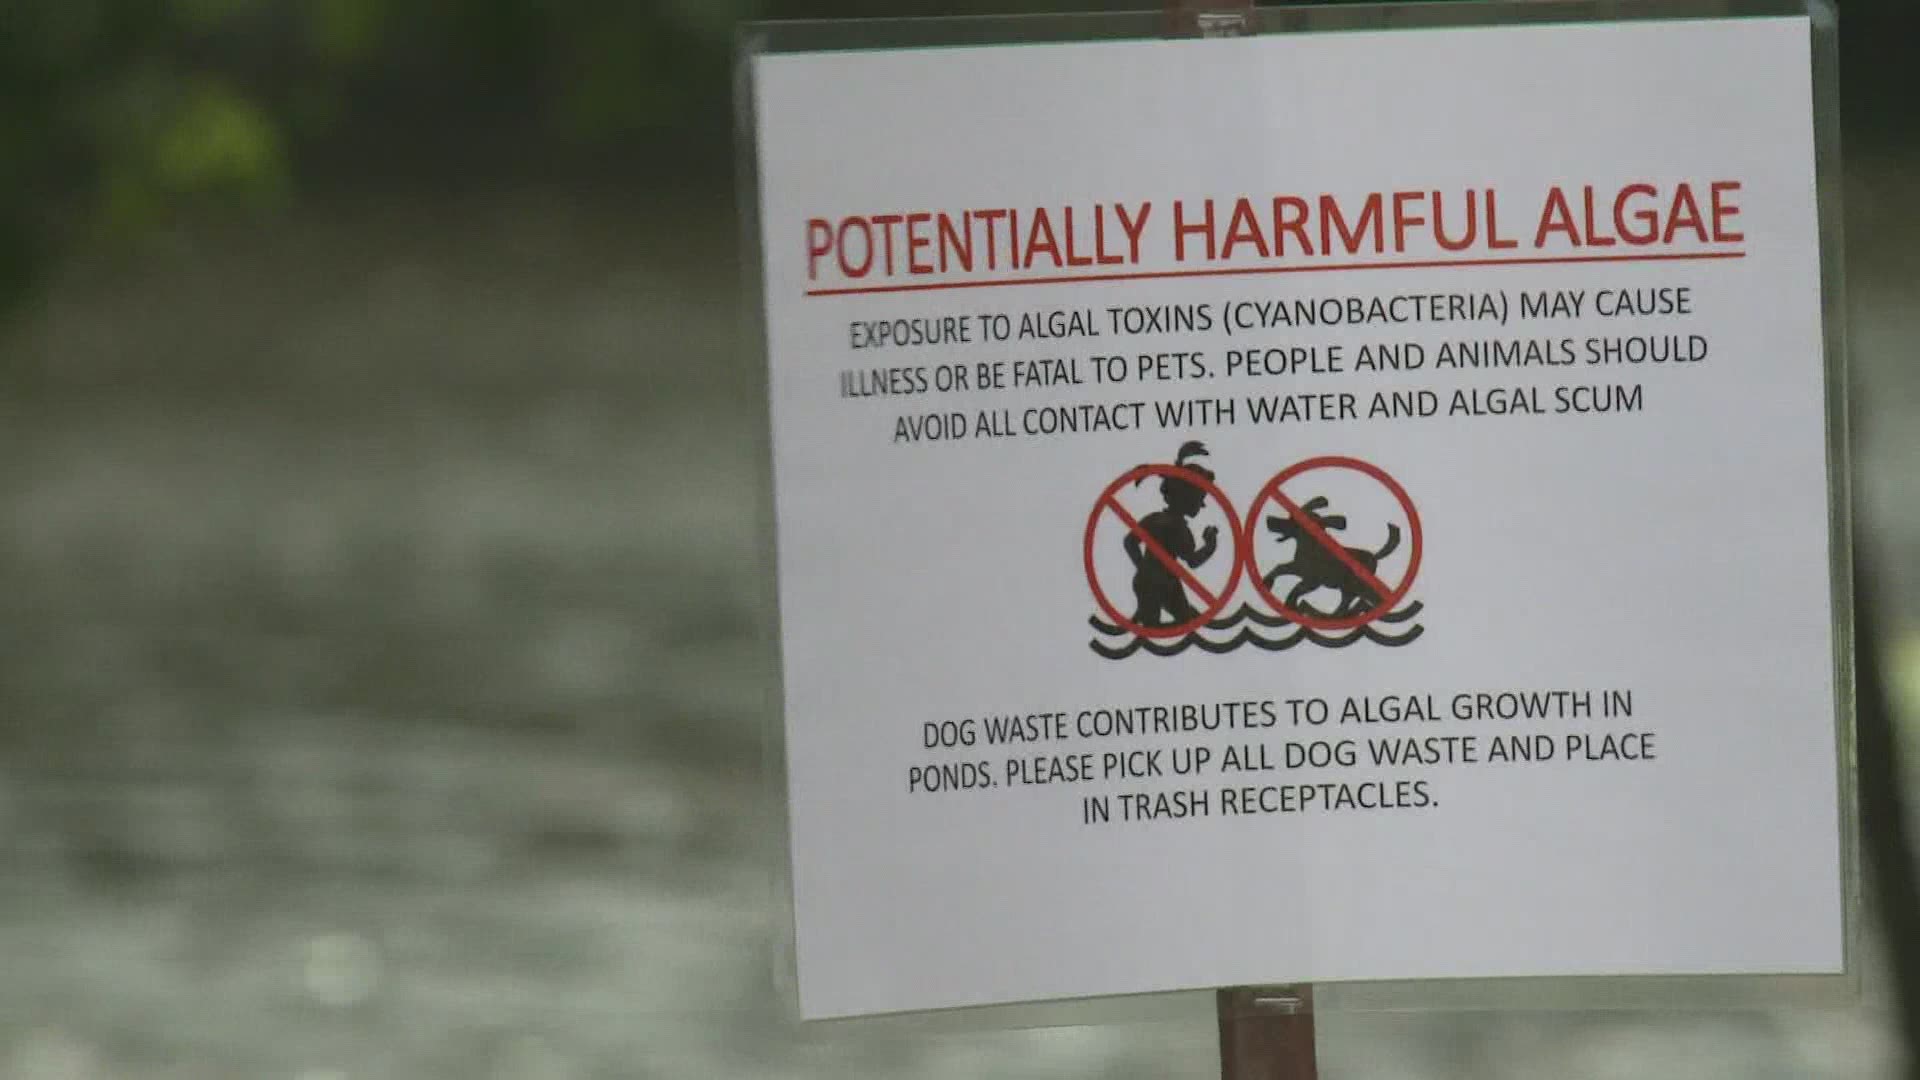 The Department of Environmental Protection has confirmed that the algae bloom in Hinckley park is a cyano-bacteria which is extremely dangerous for dogs.